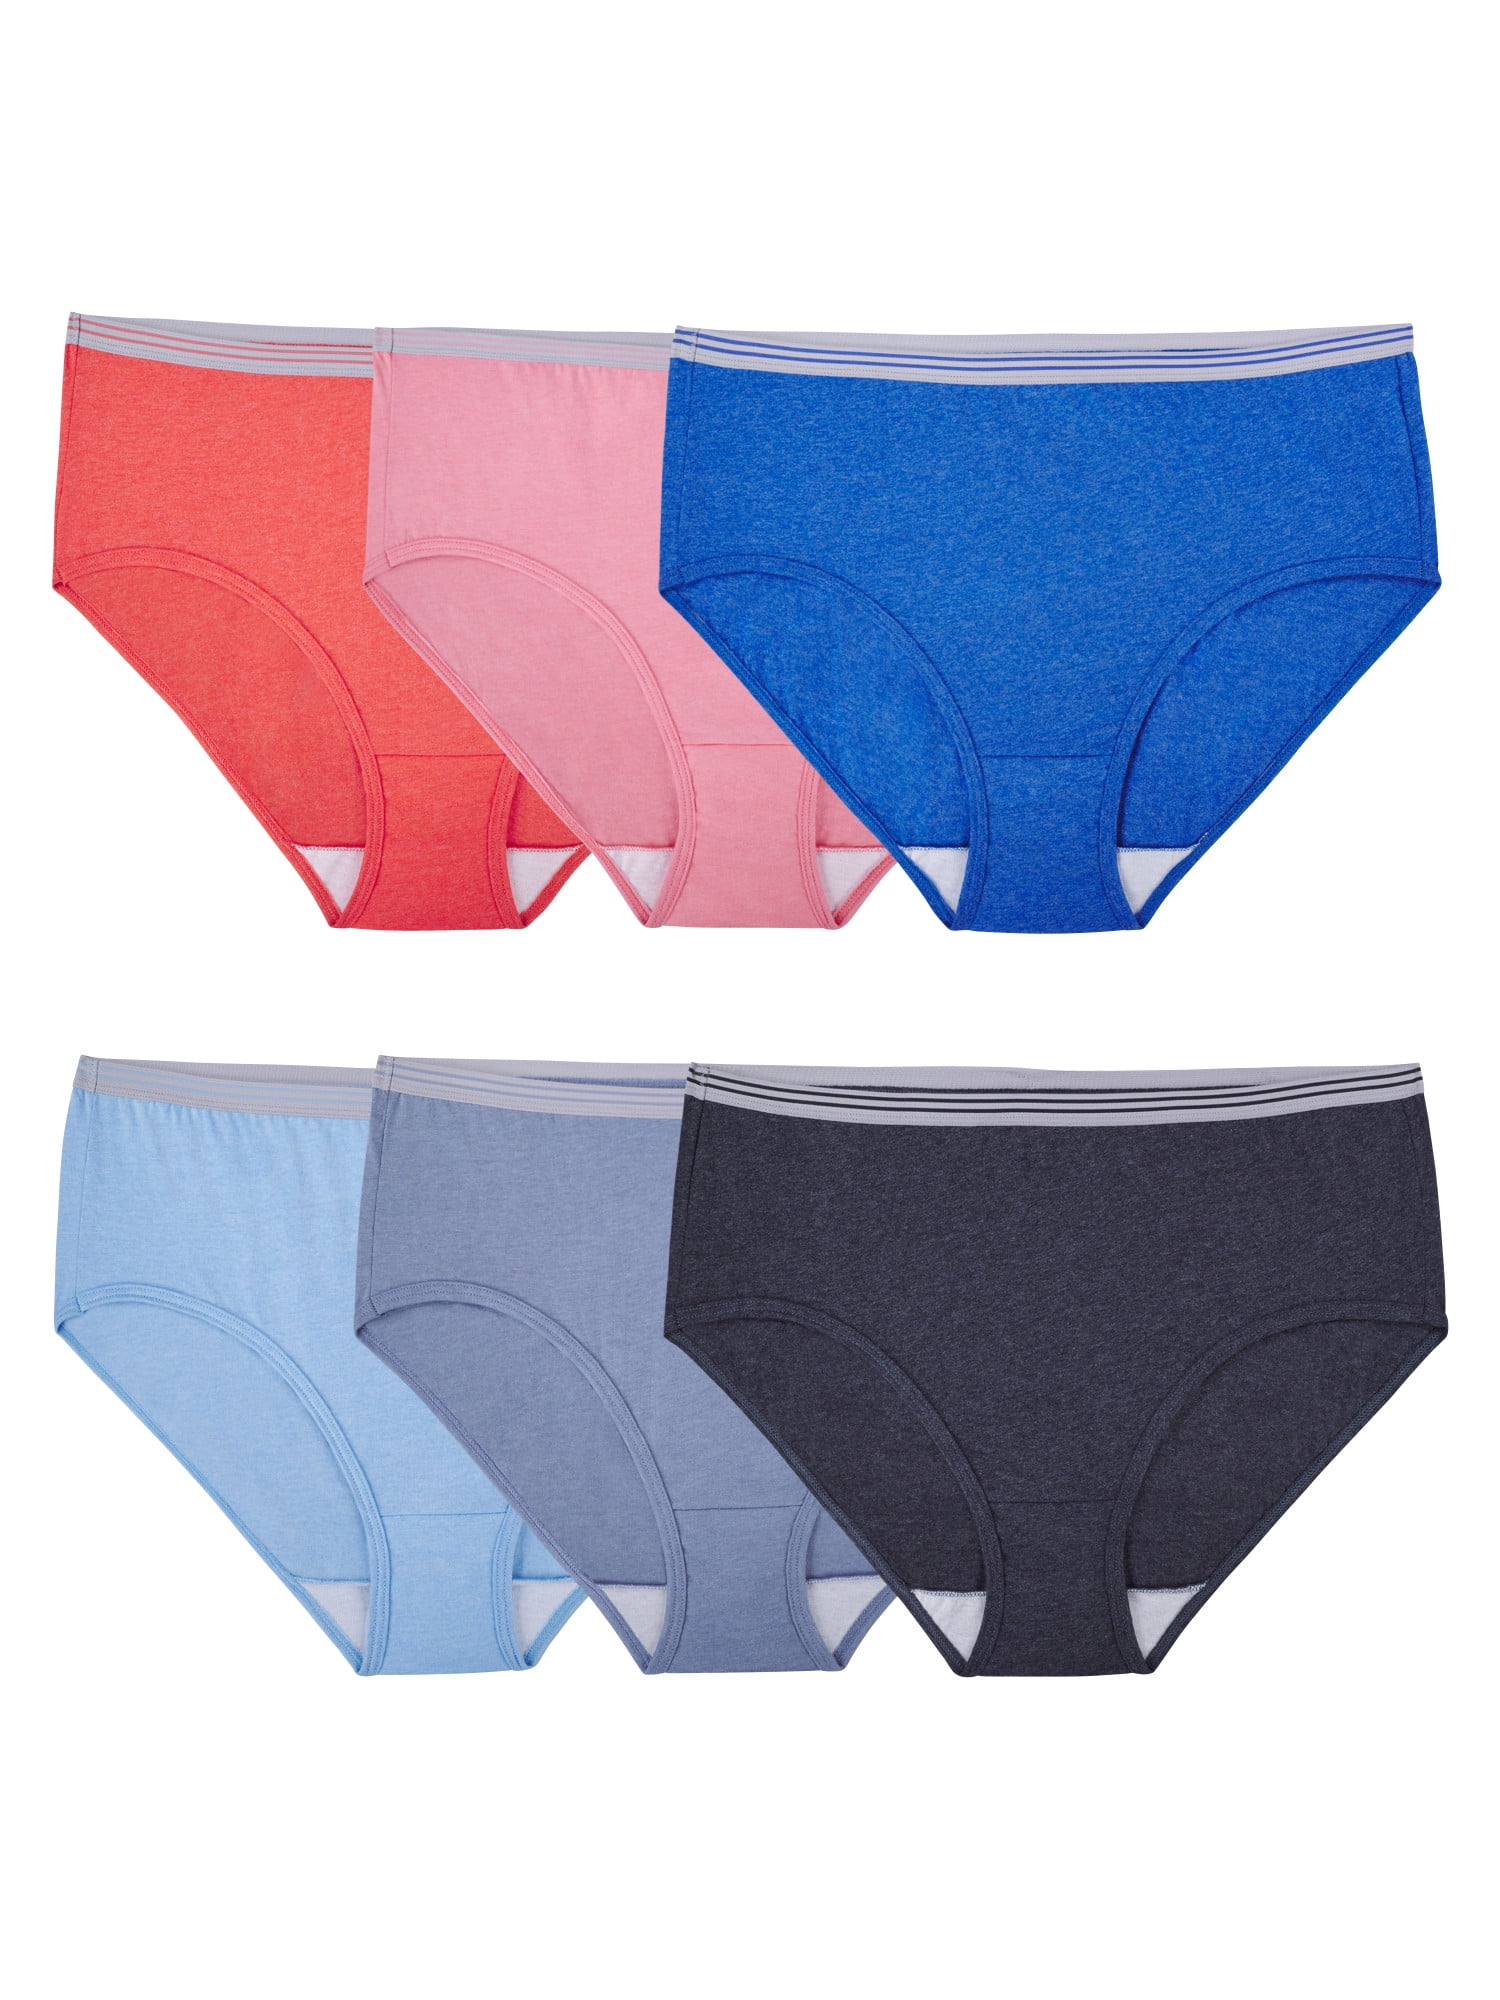 Fruit of the Loom Women's Low-Rise Brief Underwear, 6 Pack 